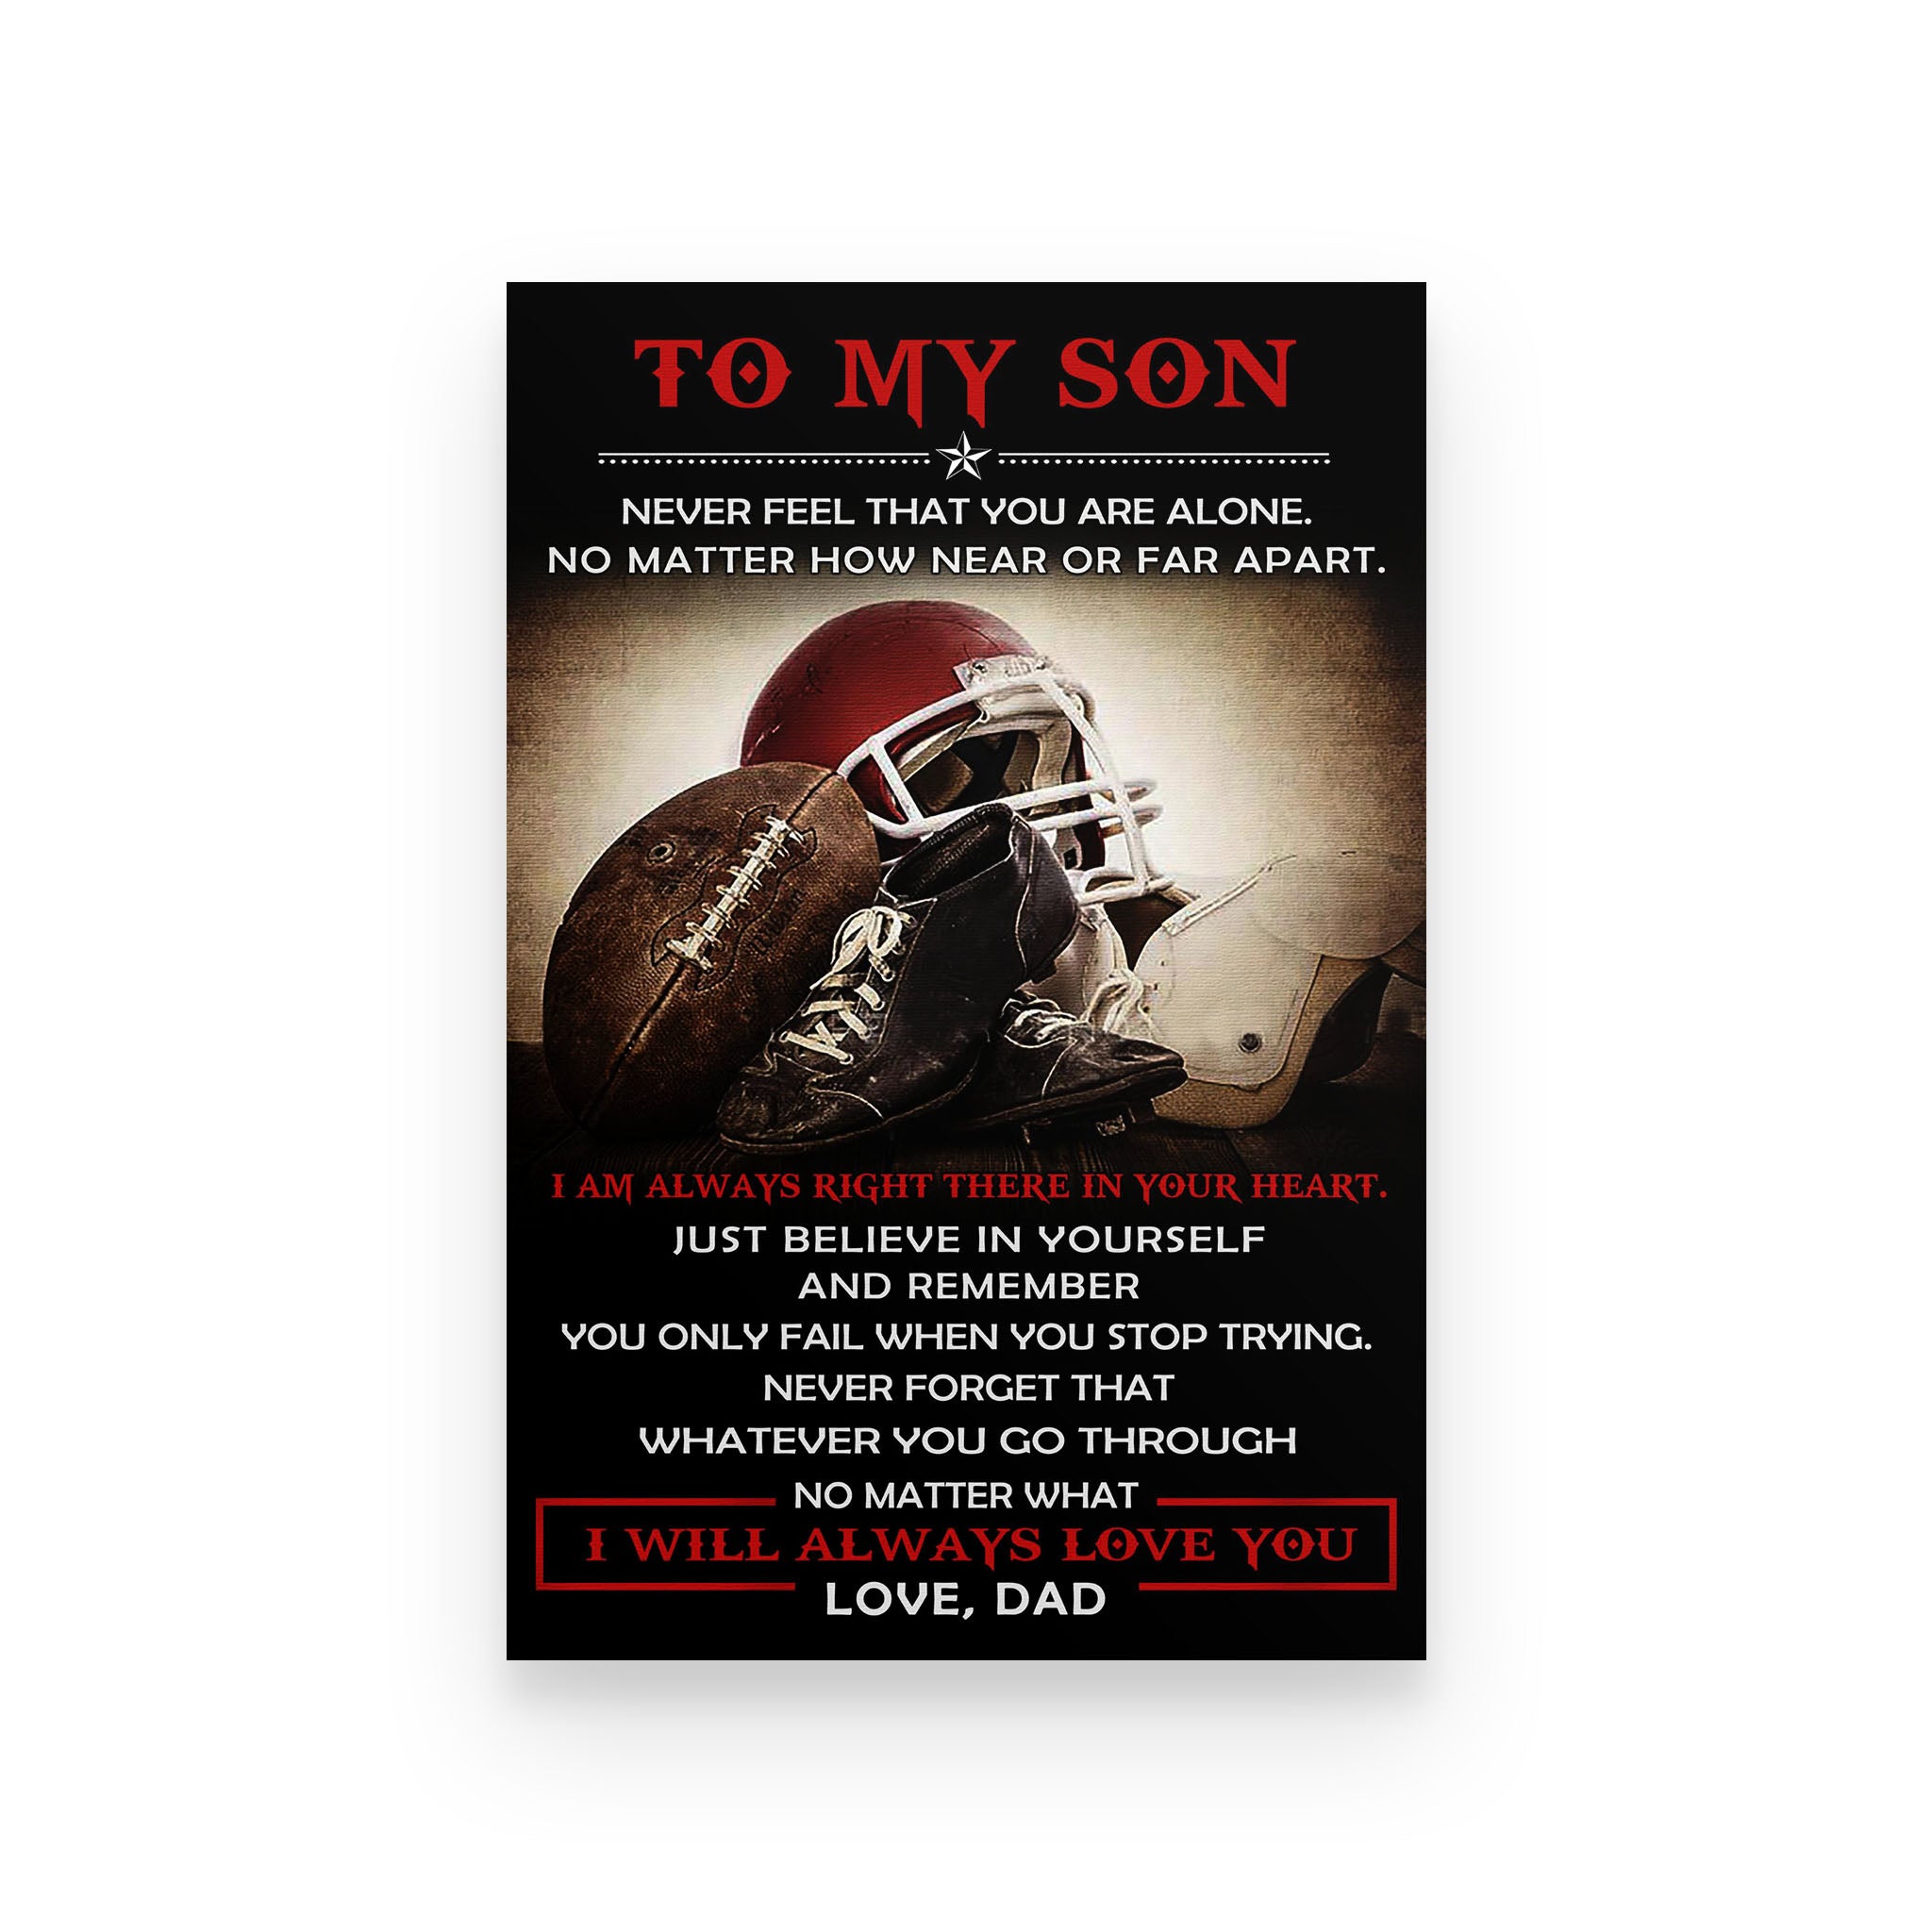 American football poster dad to son never feel that you are alone vs3